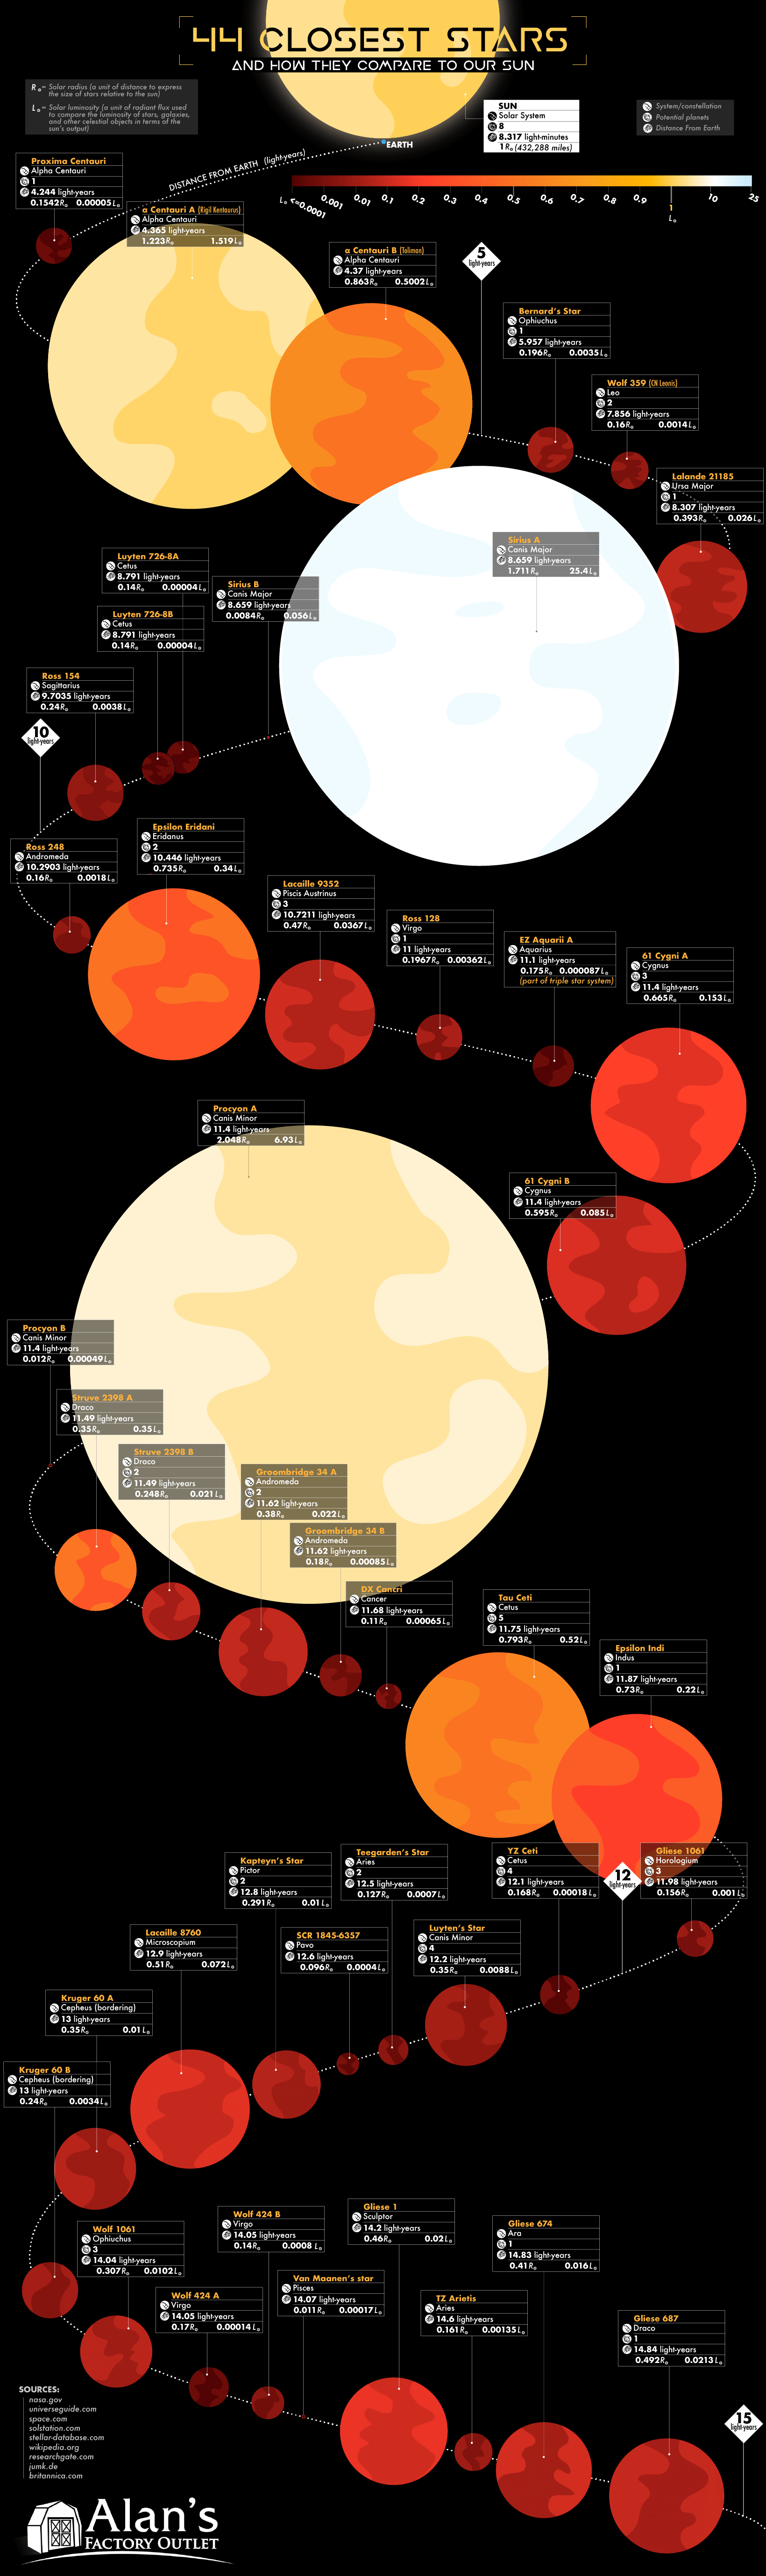 44-closest-stars-how-they-compare-sun-6